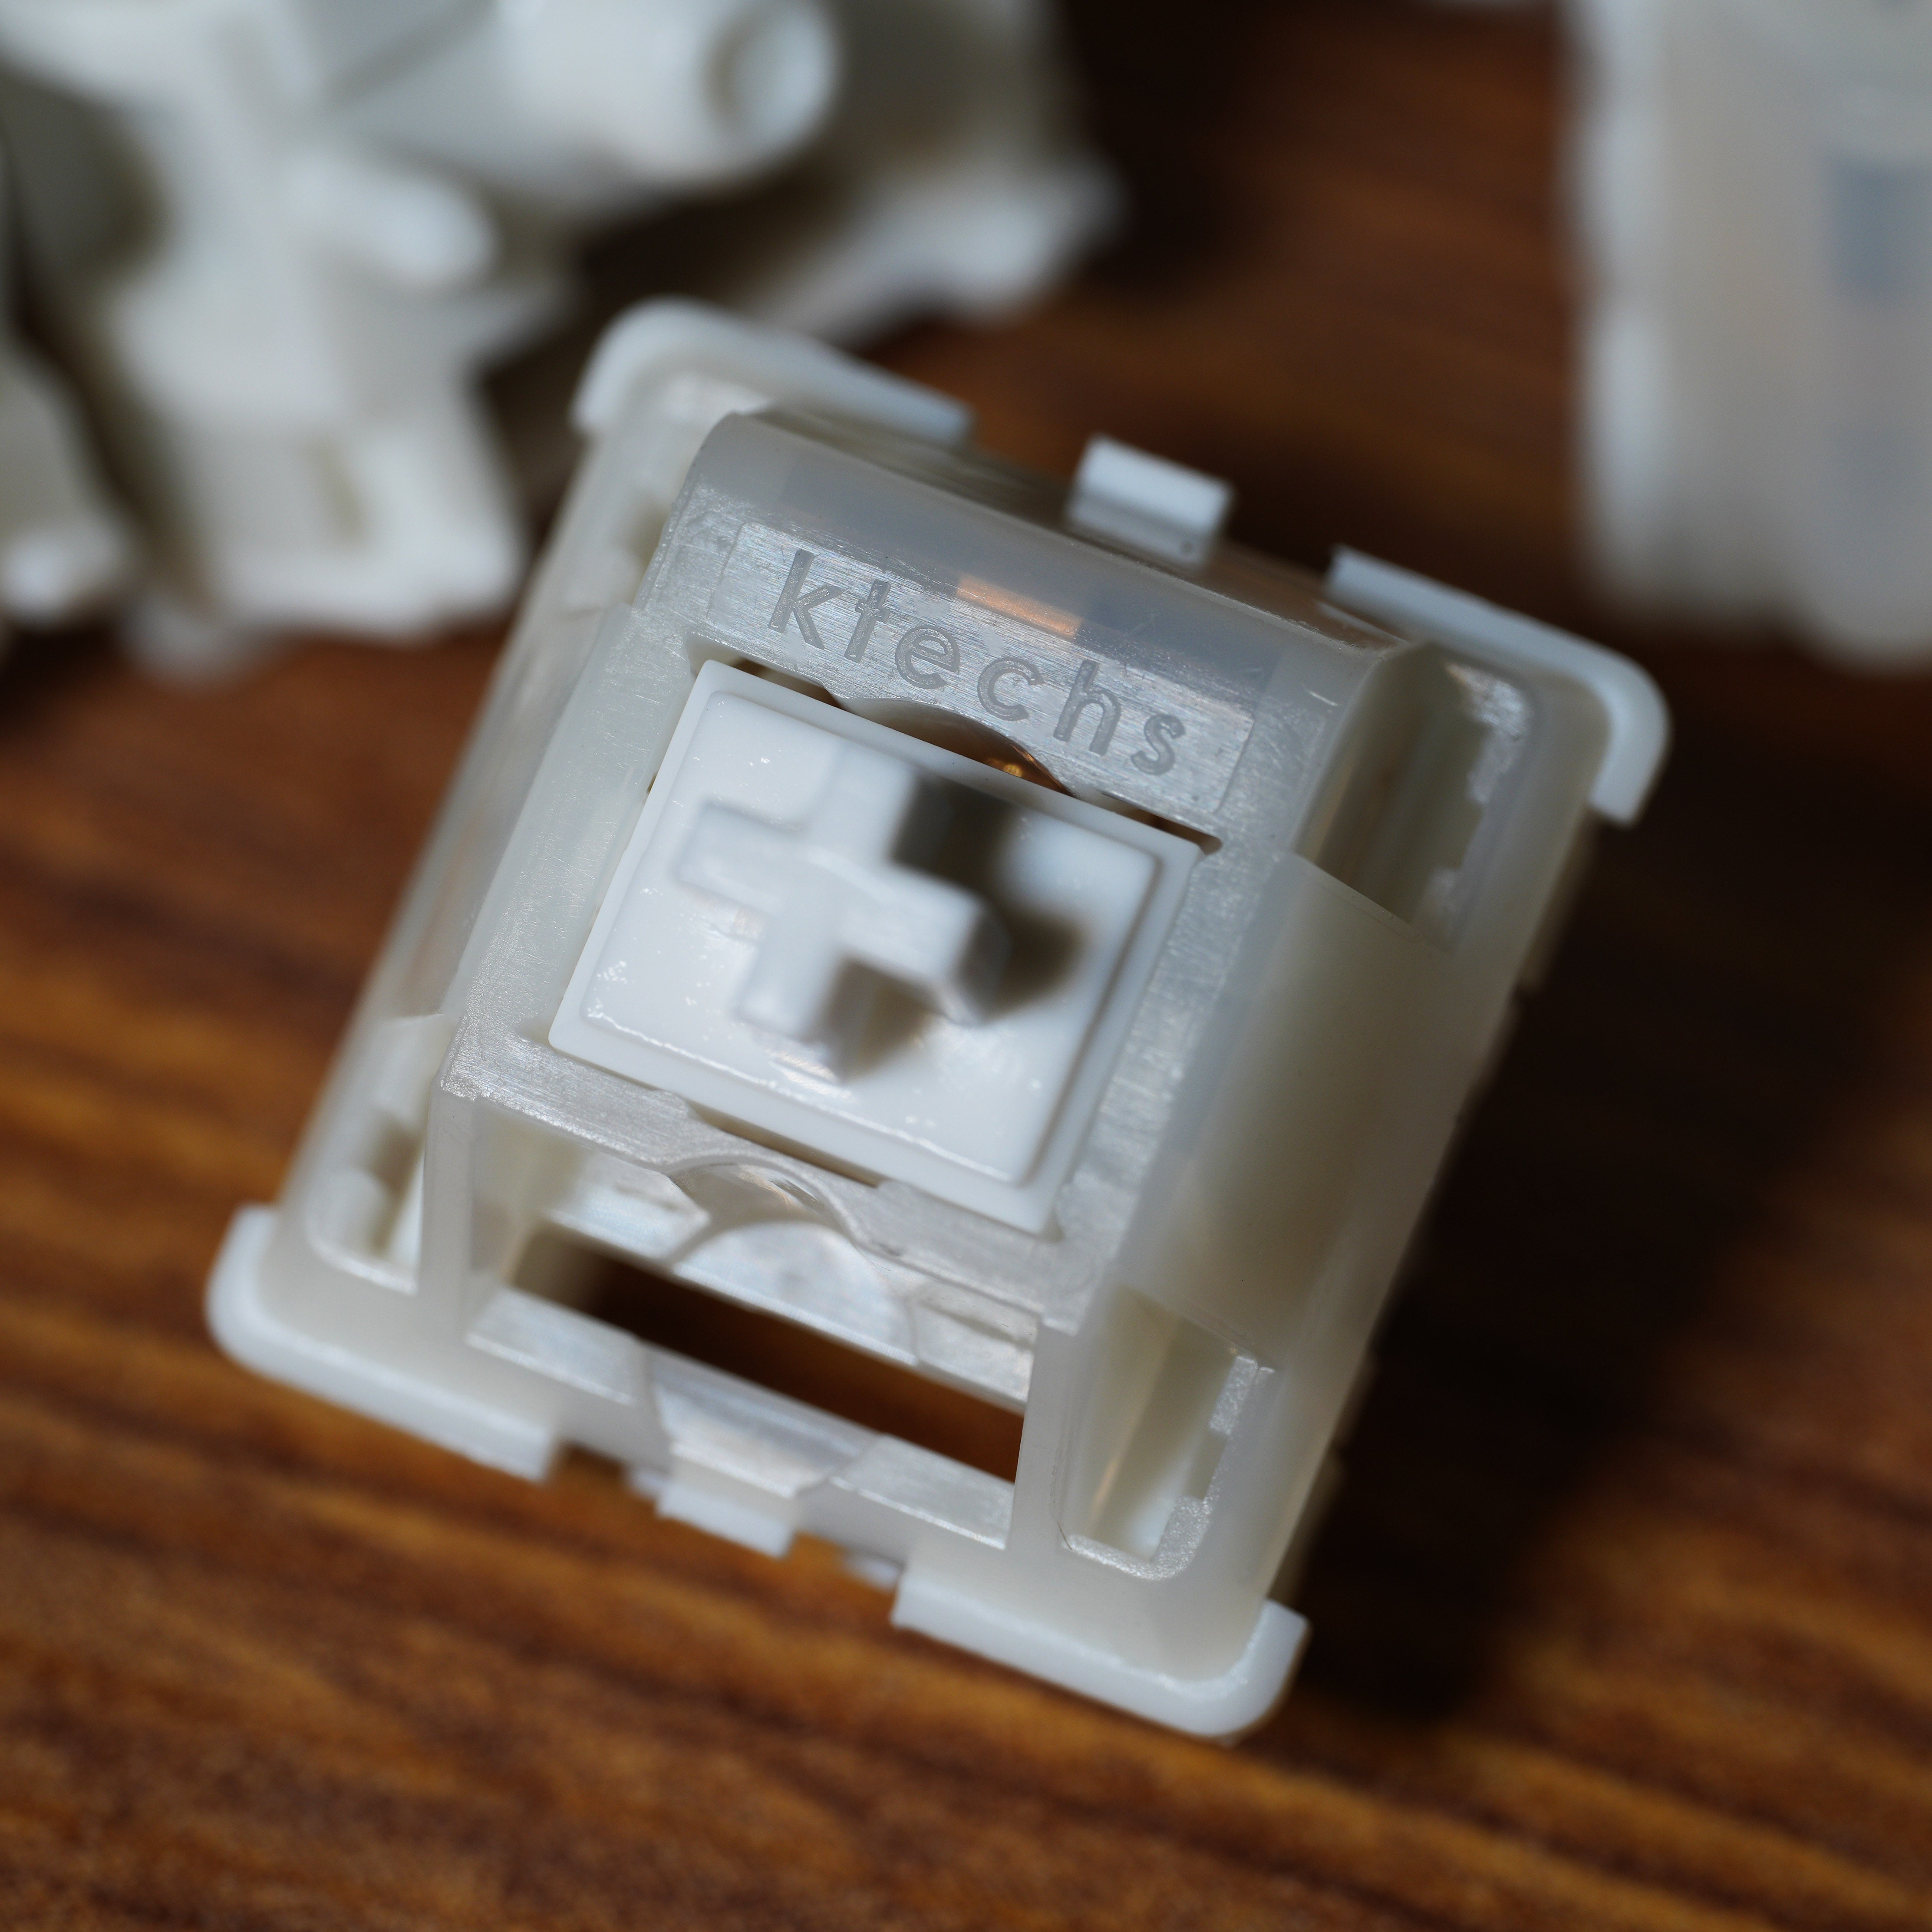 KTECHS S2V2 SNOW TACTILE SWITCH FACTORY LUBED EDITION (10PCS)